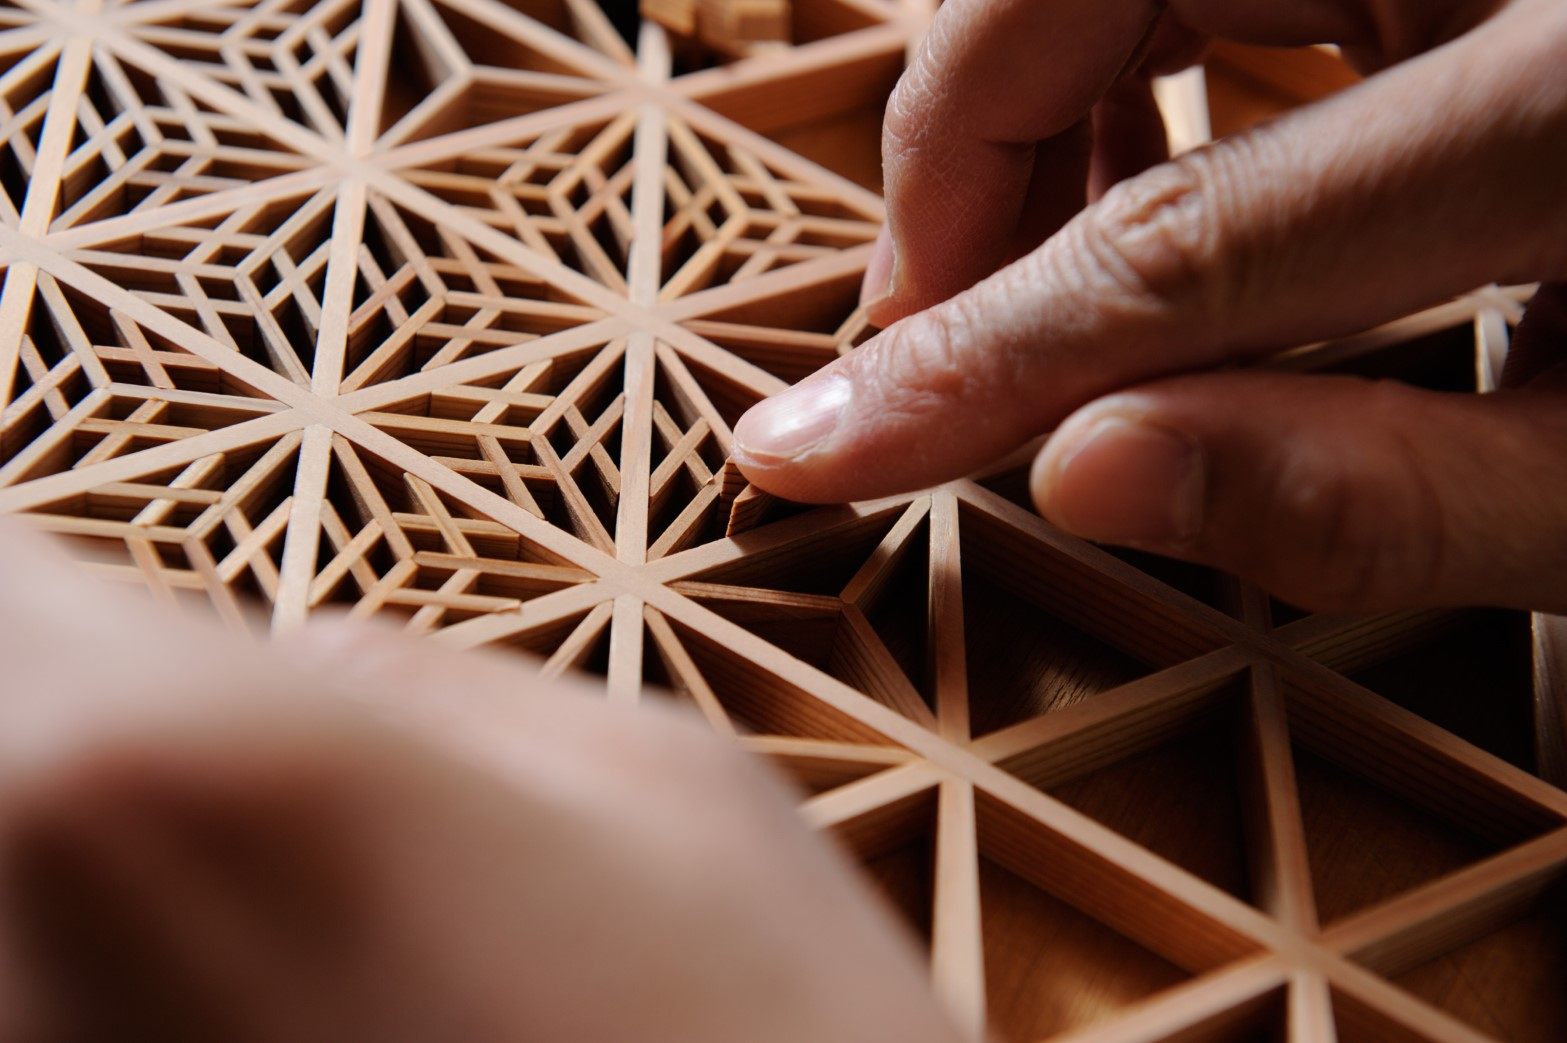 The craftsman’s delicate and precise finger movements are breathtaking to watch.